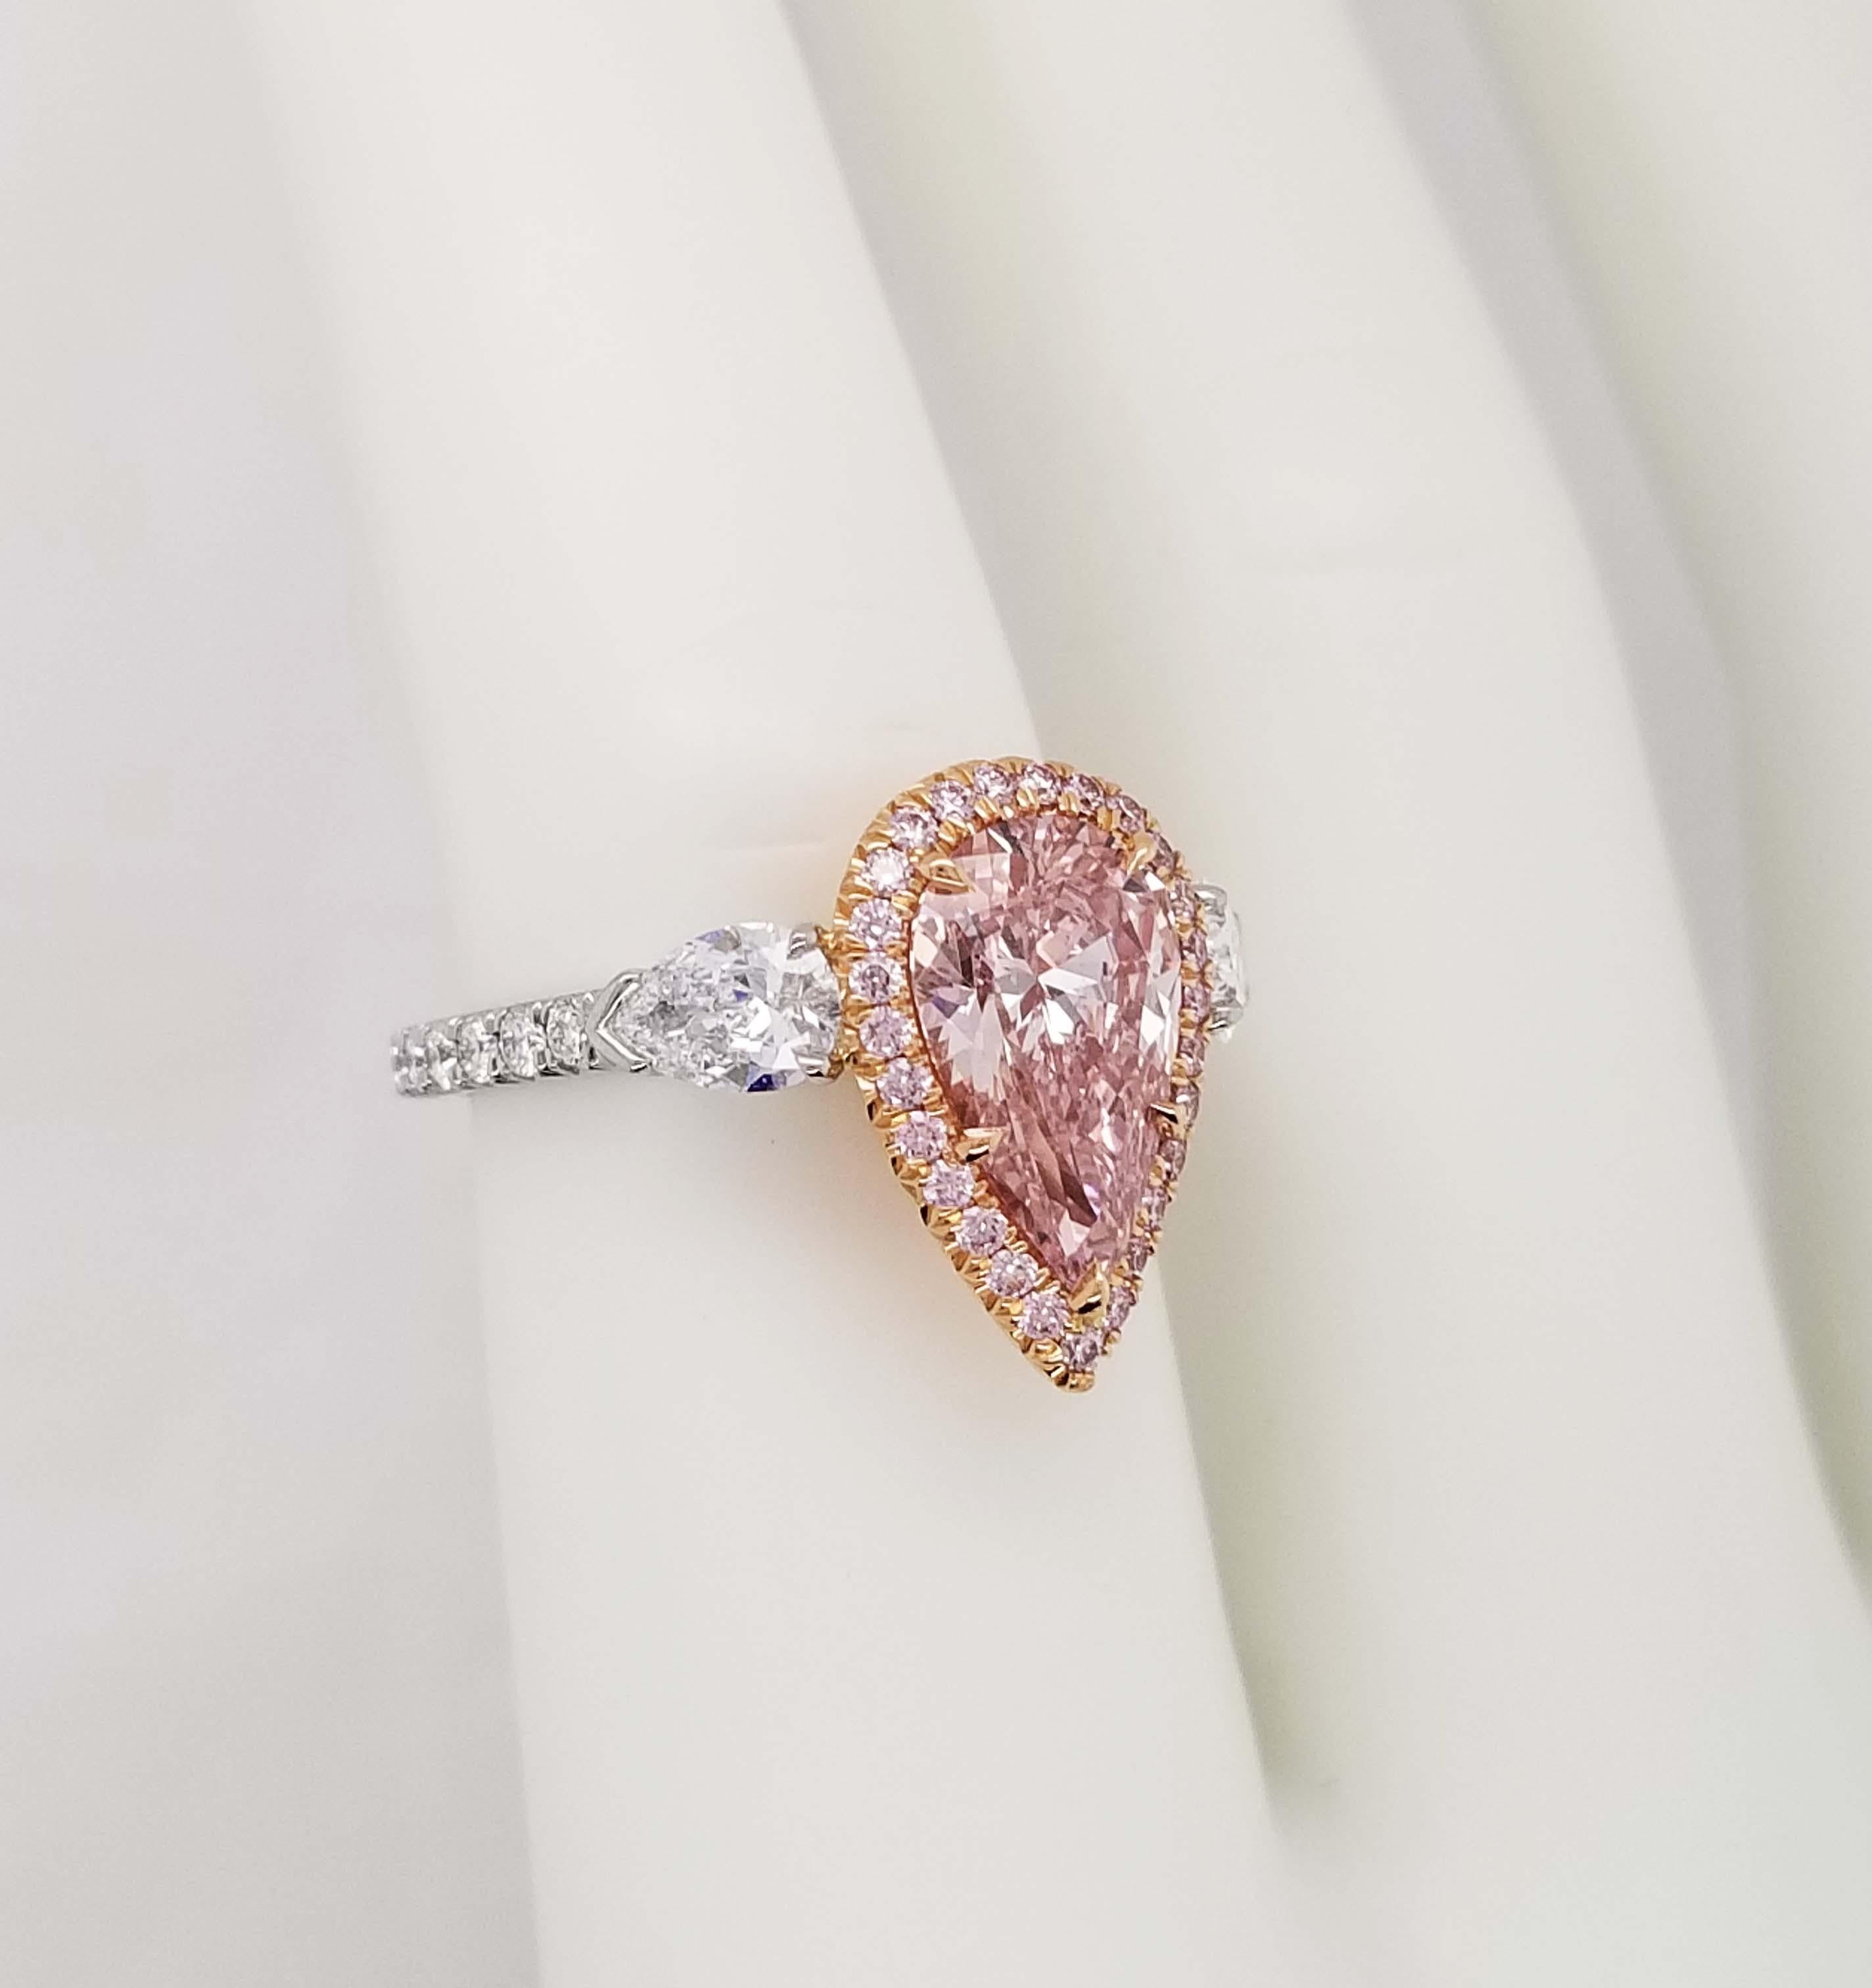 Scarselli 2 Carat Pear Shape Pink Diamond Ring in Platinum and 18k Goldralds In New Condition For Sale In New York, NY